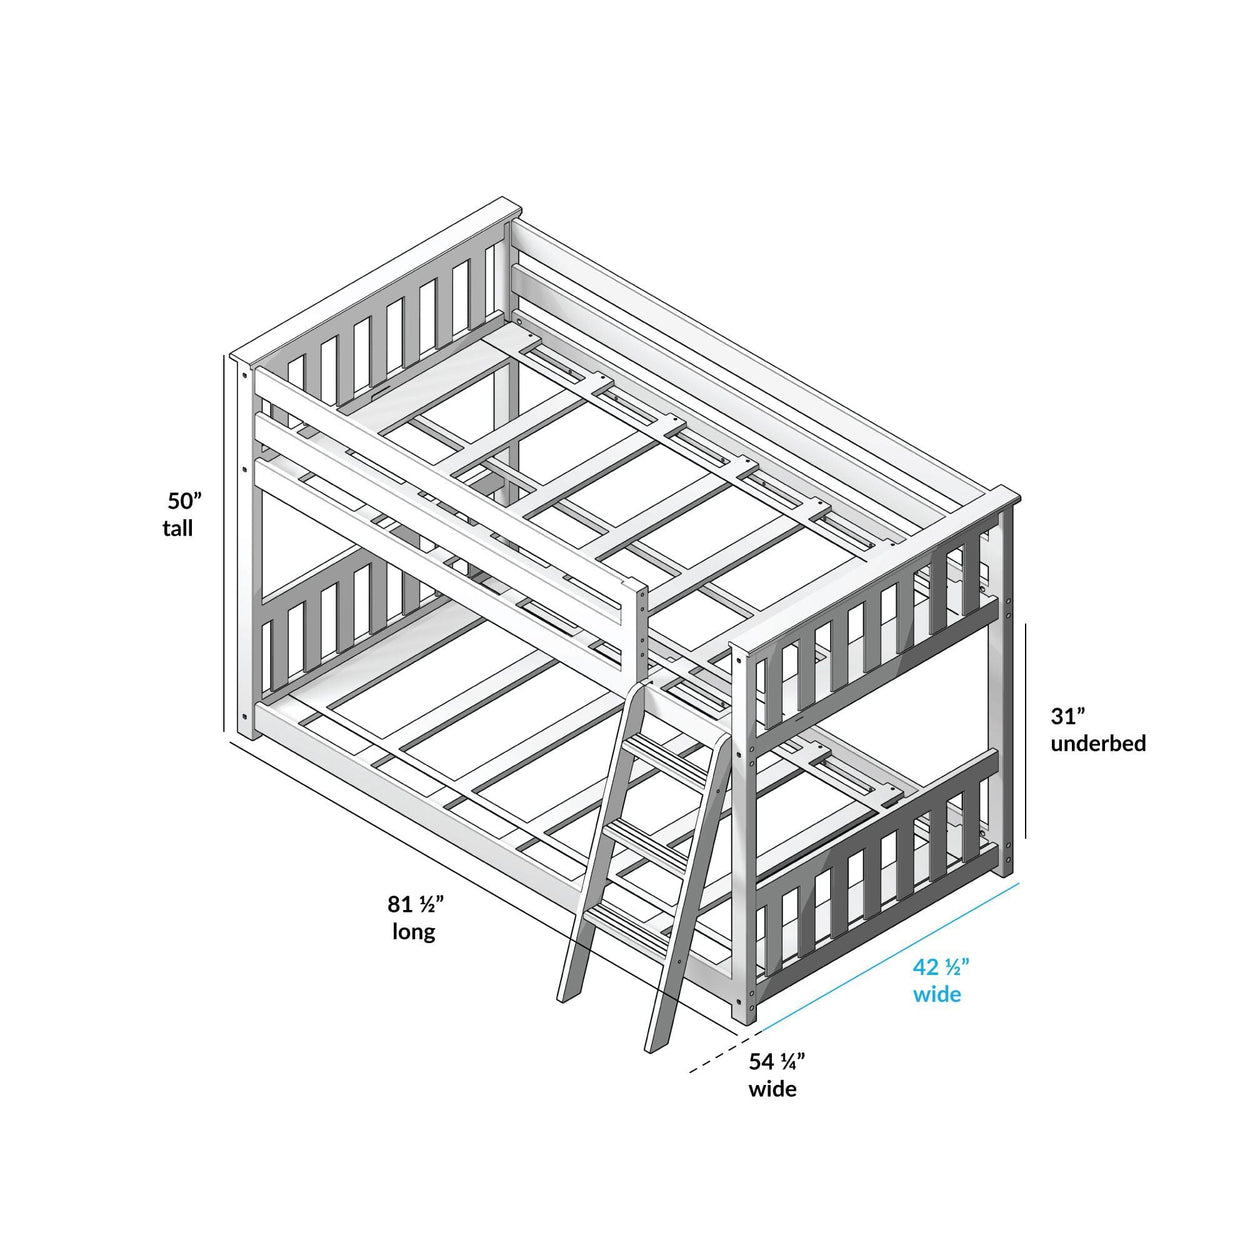 180214002309 : Bunk Beds Twin over Twin Low Bunk with Three Guard Rails, White